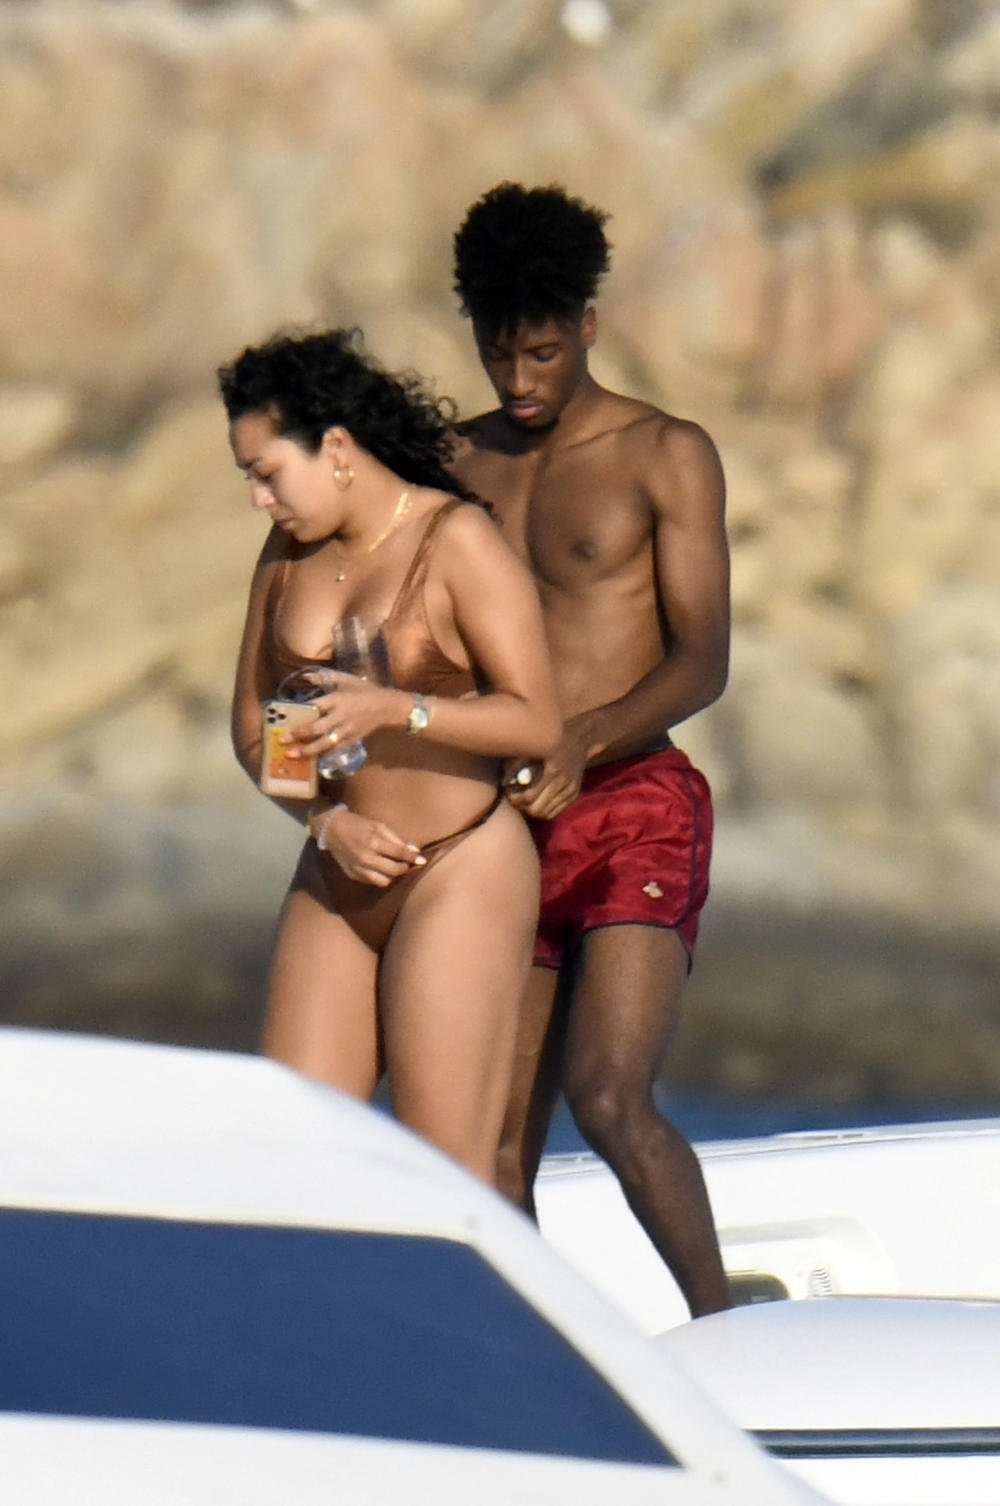 Kingsley Coman on Yacht With His Girlfriiend